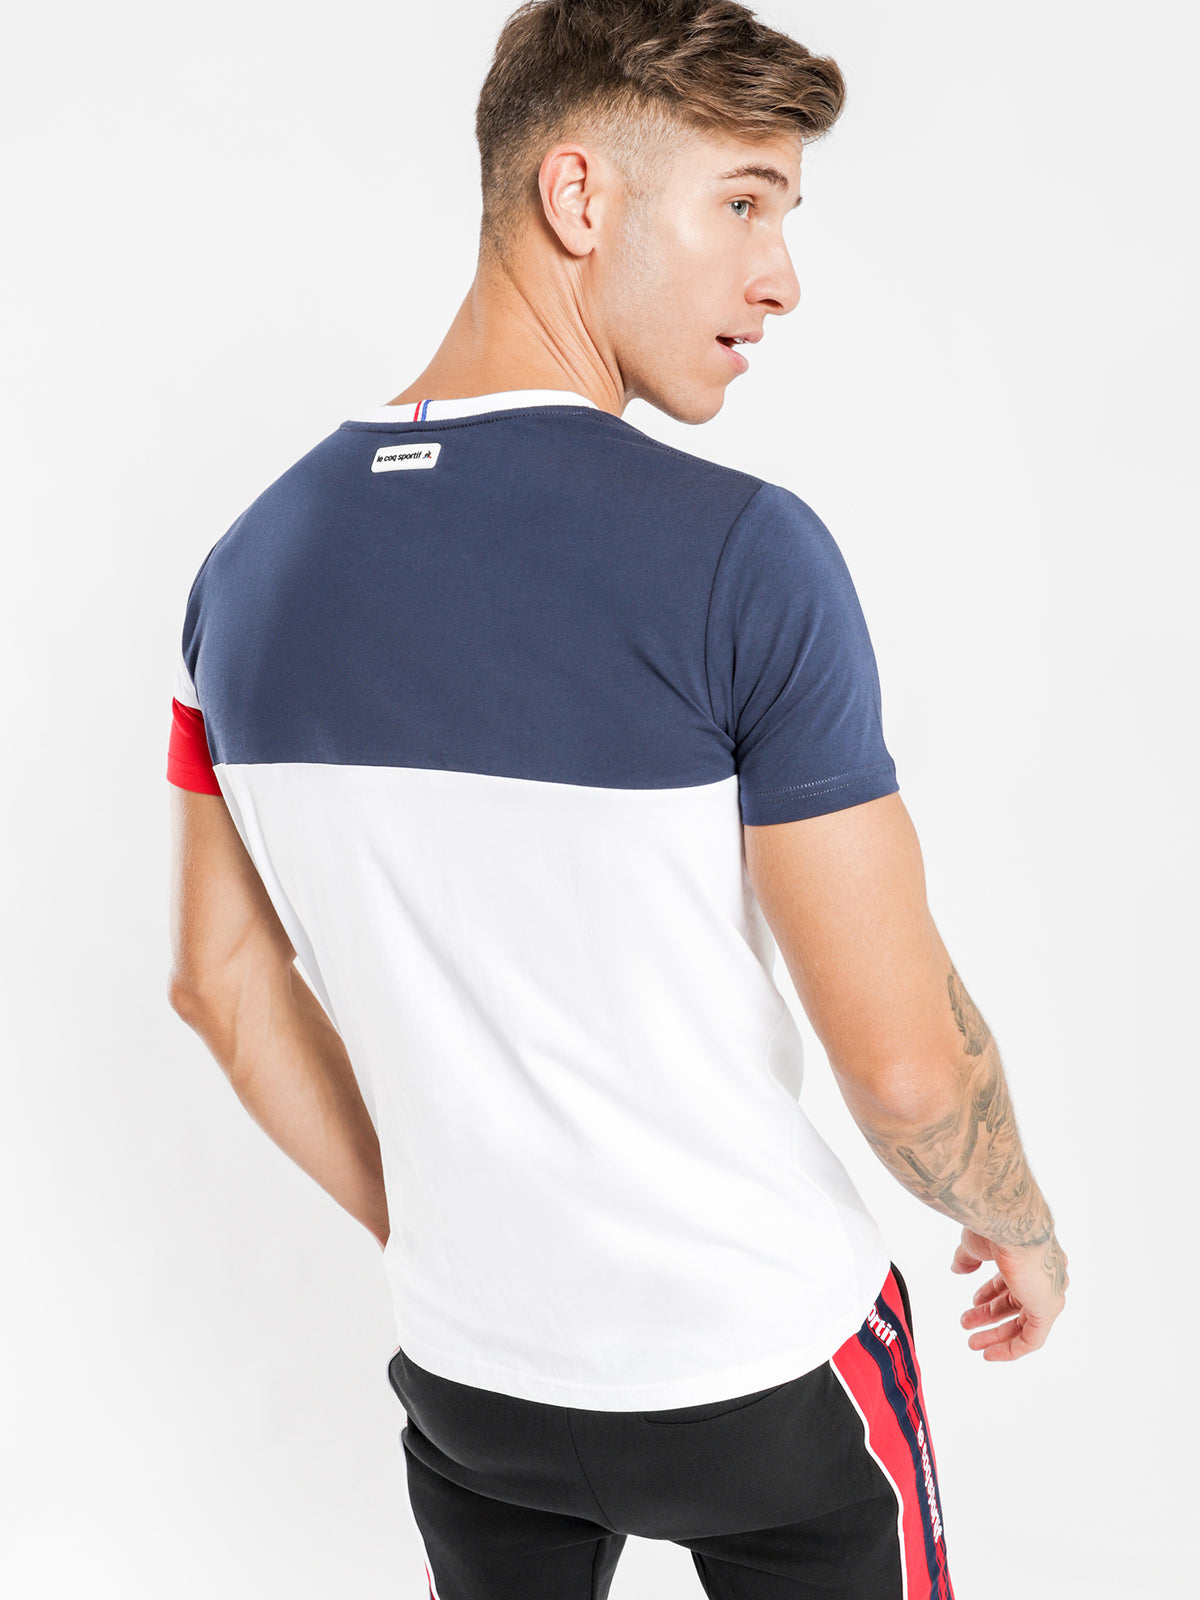 Tricolore T-Shirt in Navy White &amp; Red